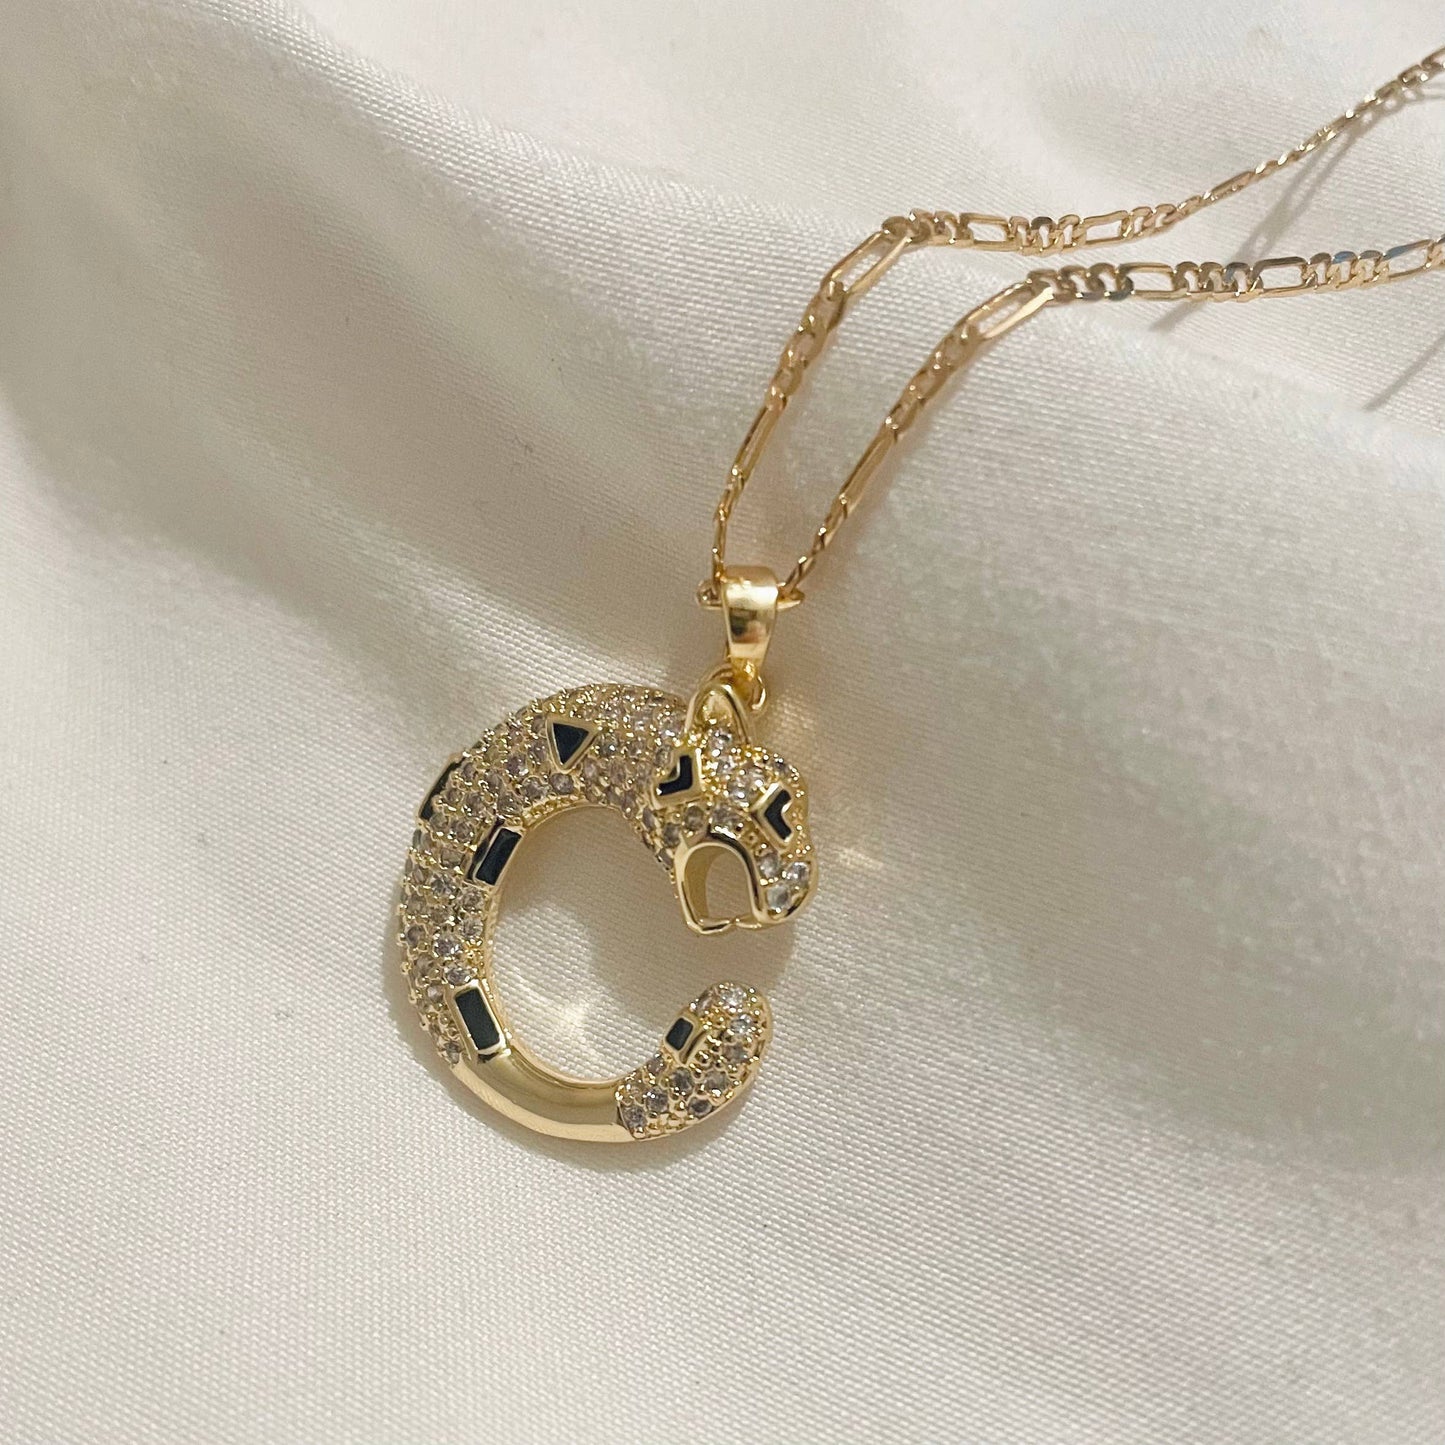 Ouroboros Gold Snake Necklace. Gold filled chain necklaces